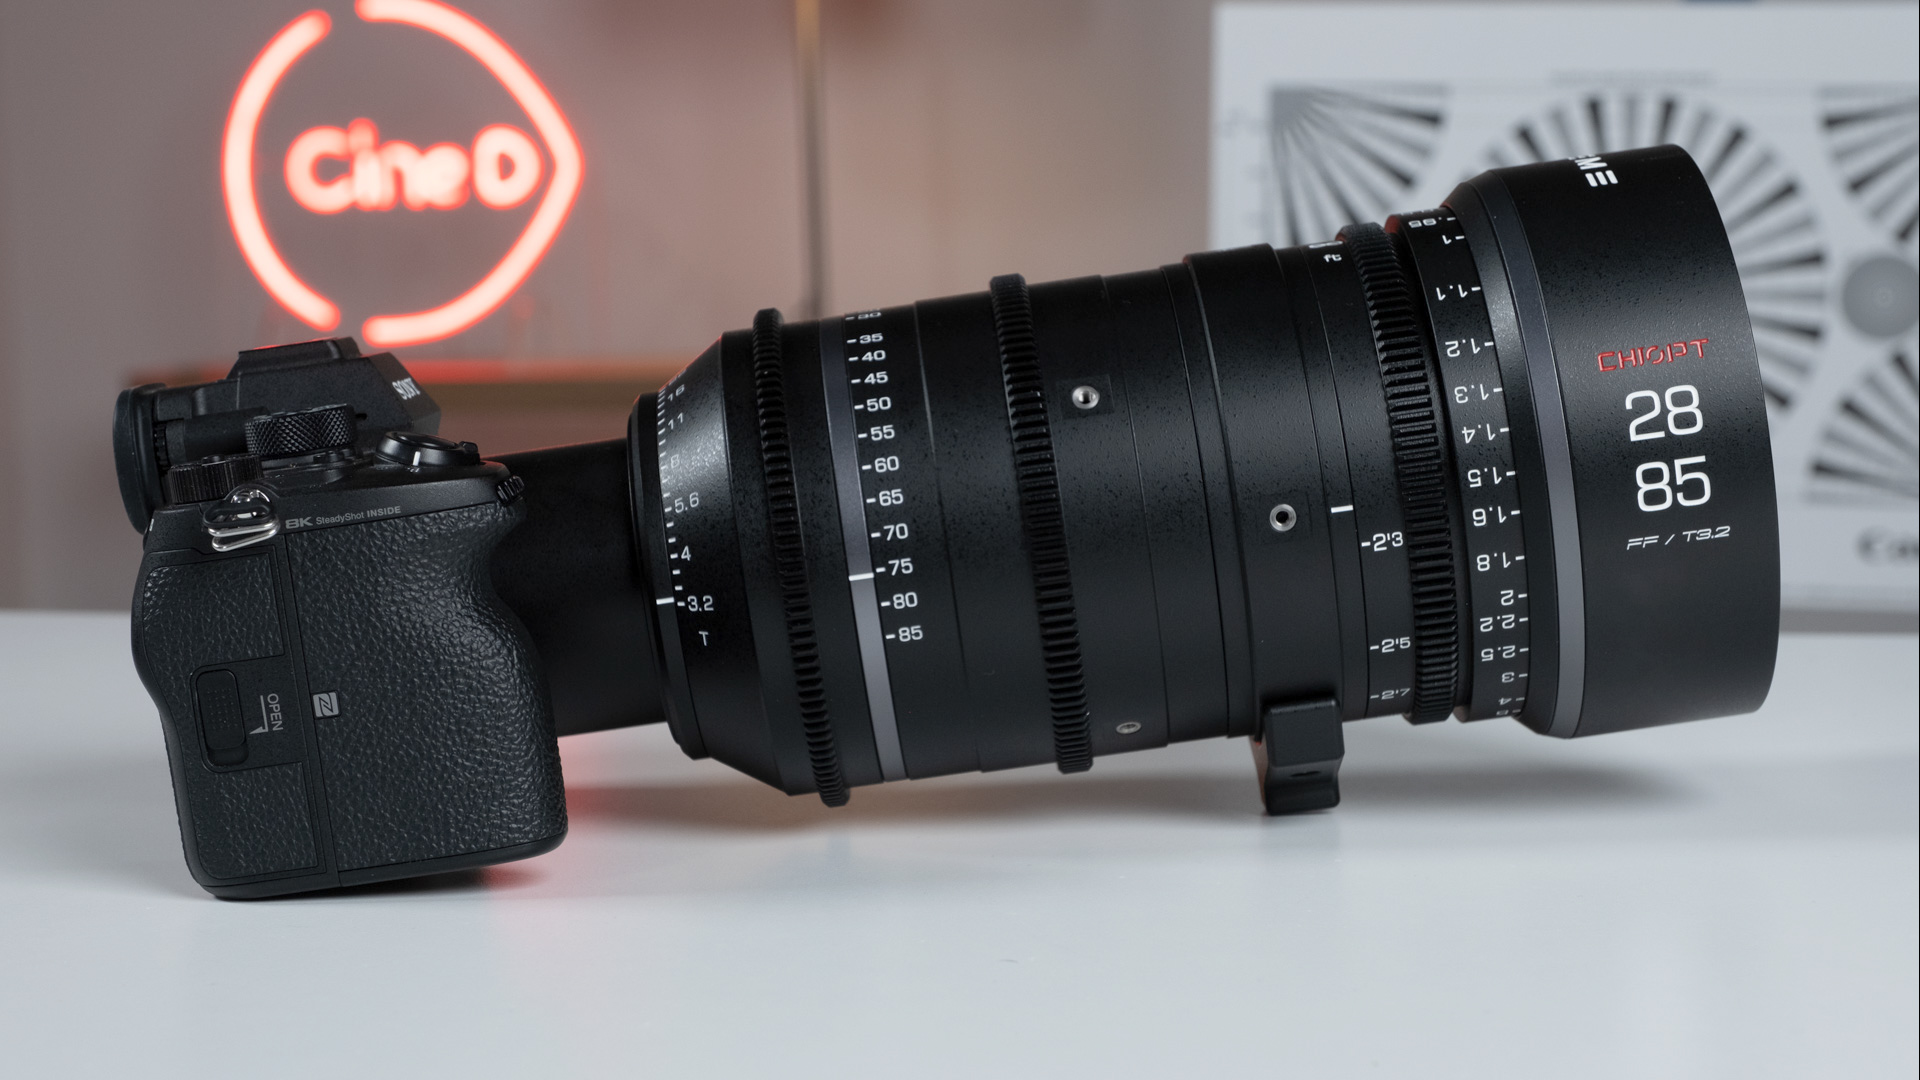 CHIOPT XTREME ZOOM 28-85mm Lens Review and Mini-Documentary | CineD